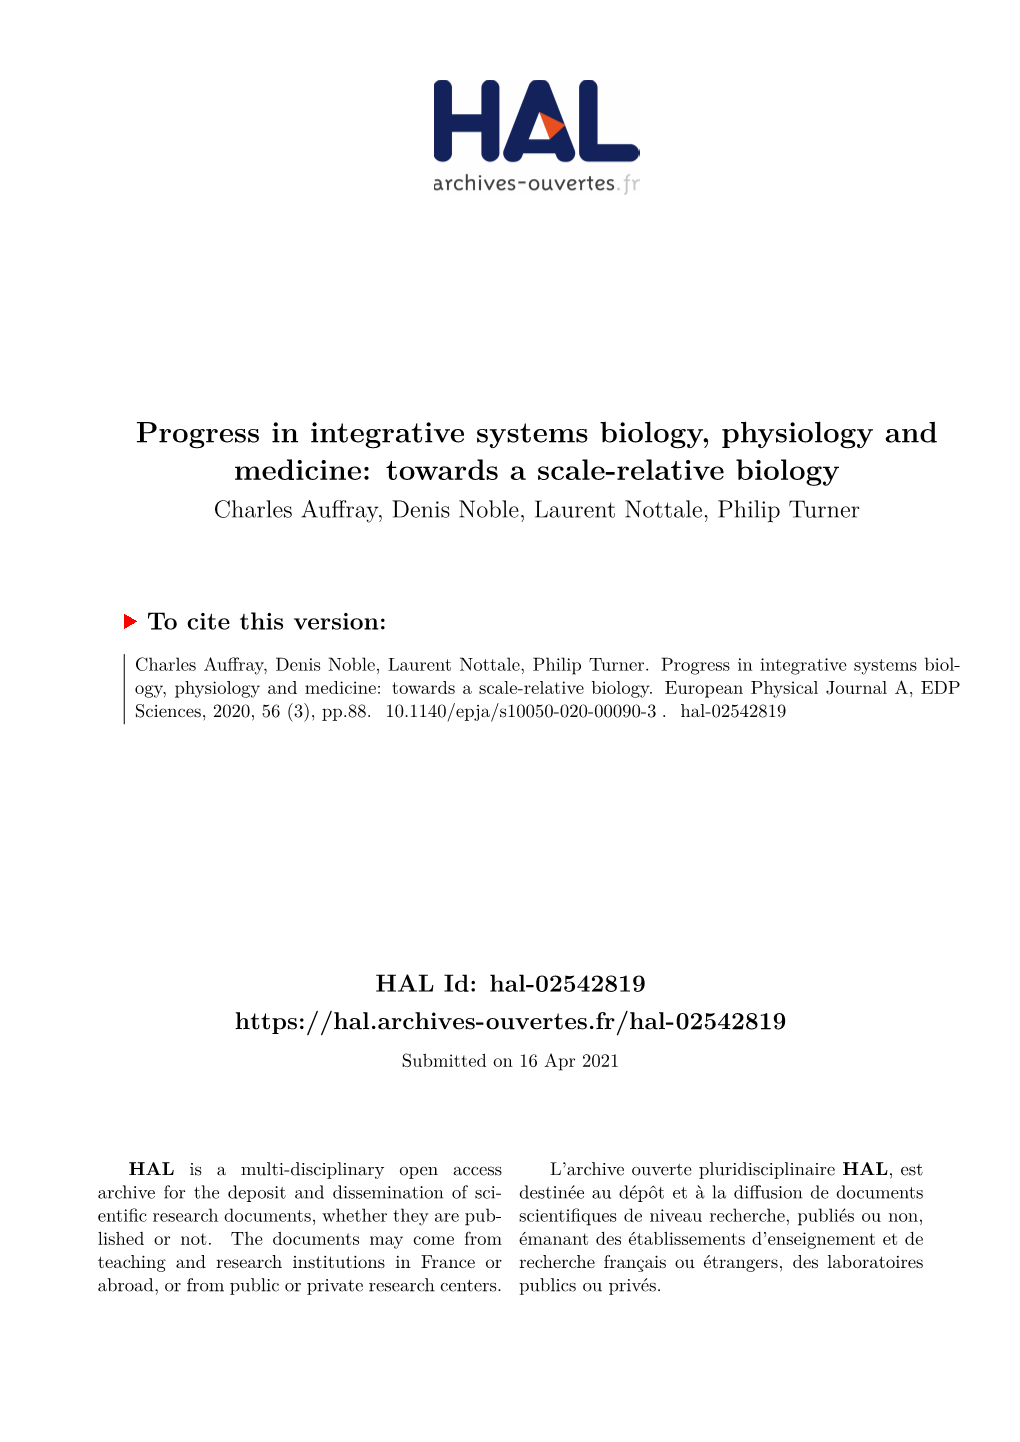 Progress in Integrative Systems Biology, Physiology and Medicine: Towards a Scale-Relative Biology Charles Auffray, Denis Noble, Laurent Nottale, Philip Turner